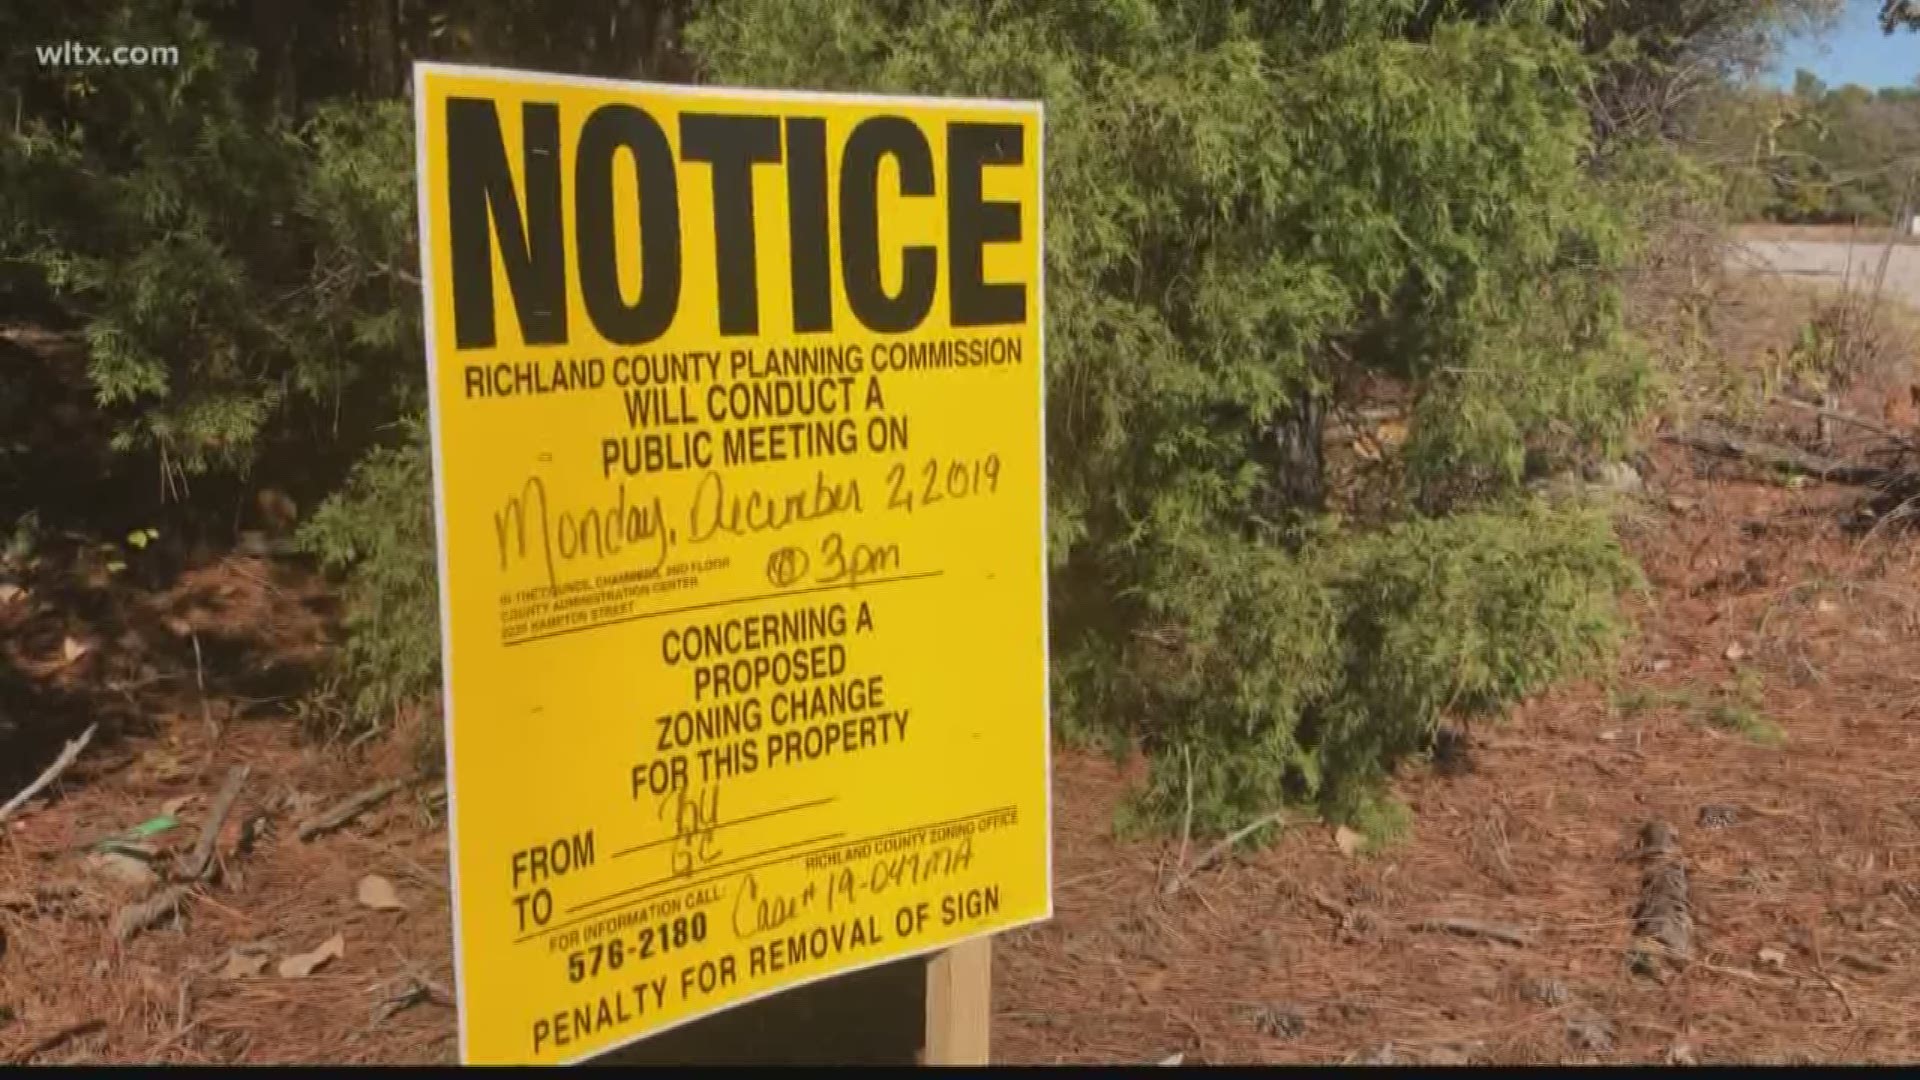 A Richland County Planning Commission Notice posted on Broad River Road in Chapin raised concerns from the community.